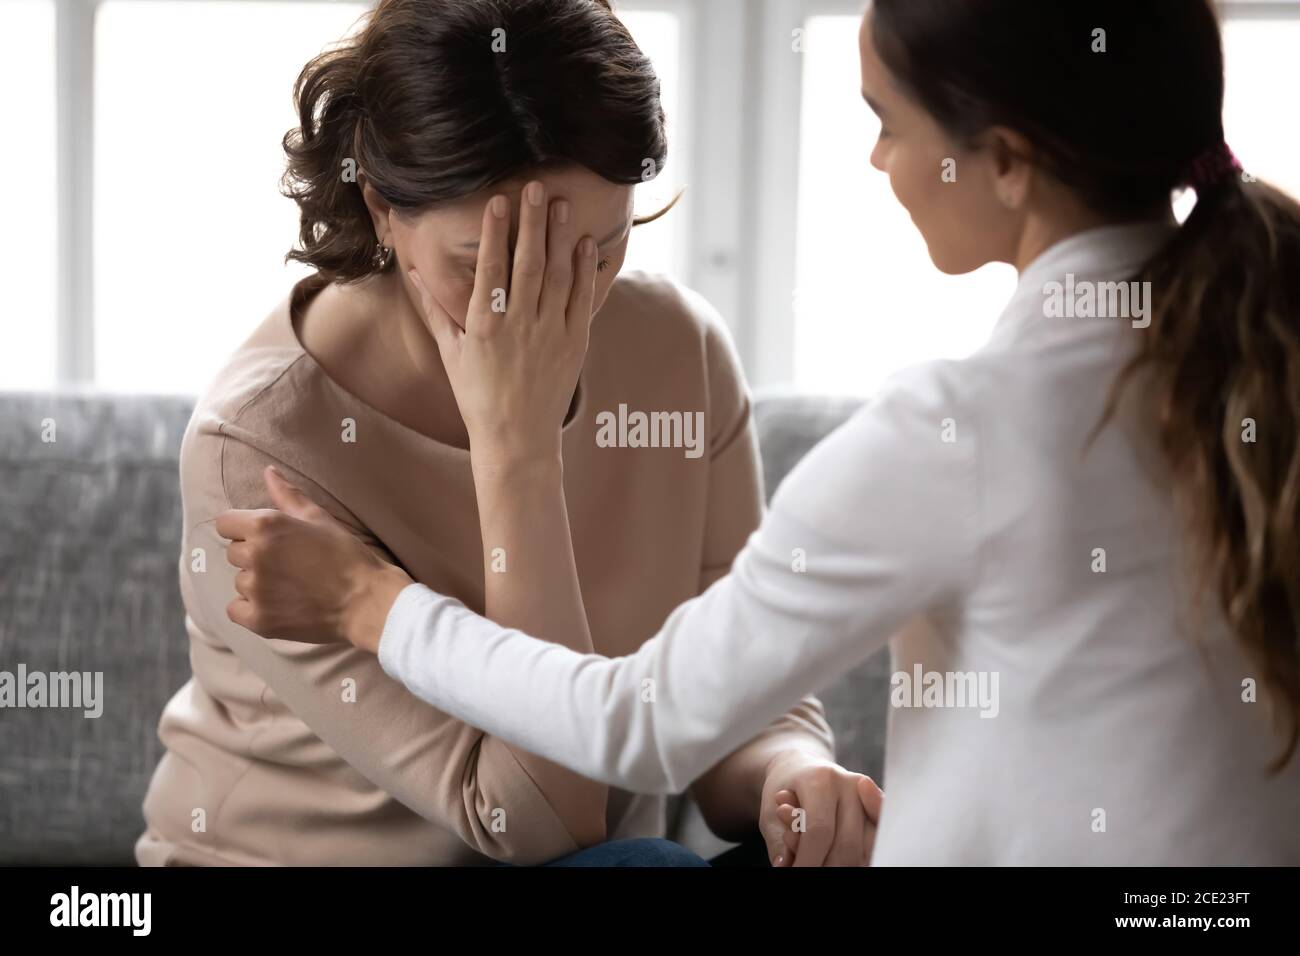 Compassionate kind young woman supporting depressed unhappy older mother. Stock Photo